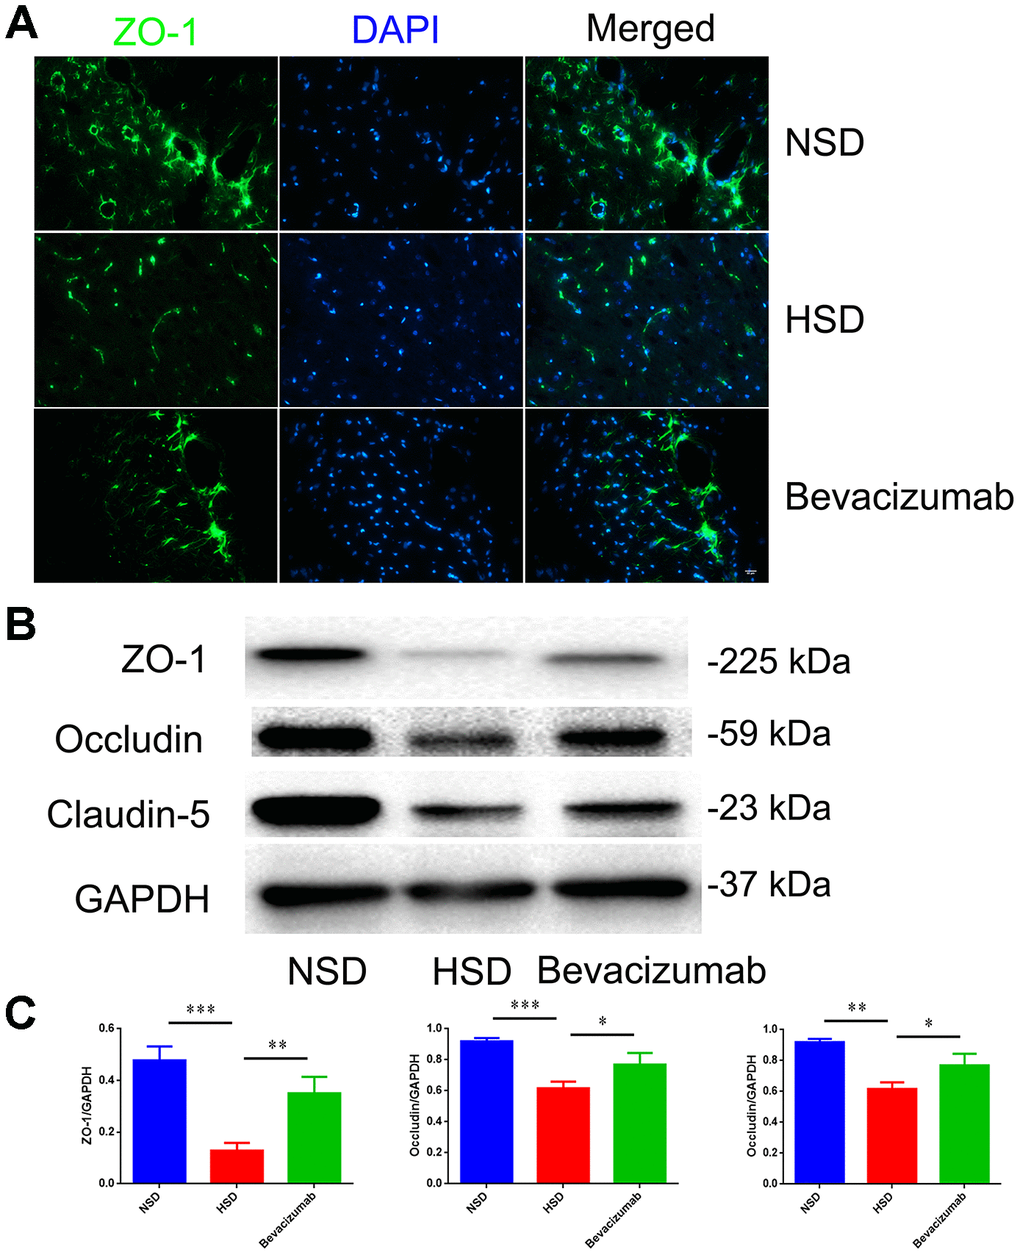 Blocking VEGF attenuates disruption of tight junctions induced by HSD. (A) Representative images showing double immunofluorescence staining of ZO-1 in green and DAPI in the brain specimens of rats. (B, C) Expression of Occludin, Claudin-5 and ZO-1 determined by western blotting; n=5, *PP